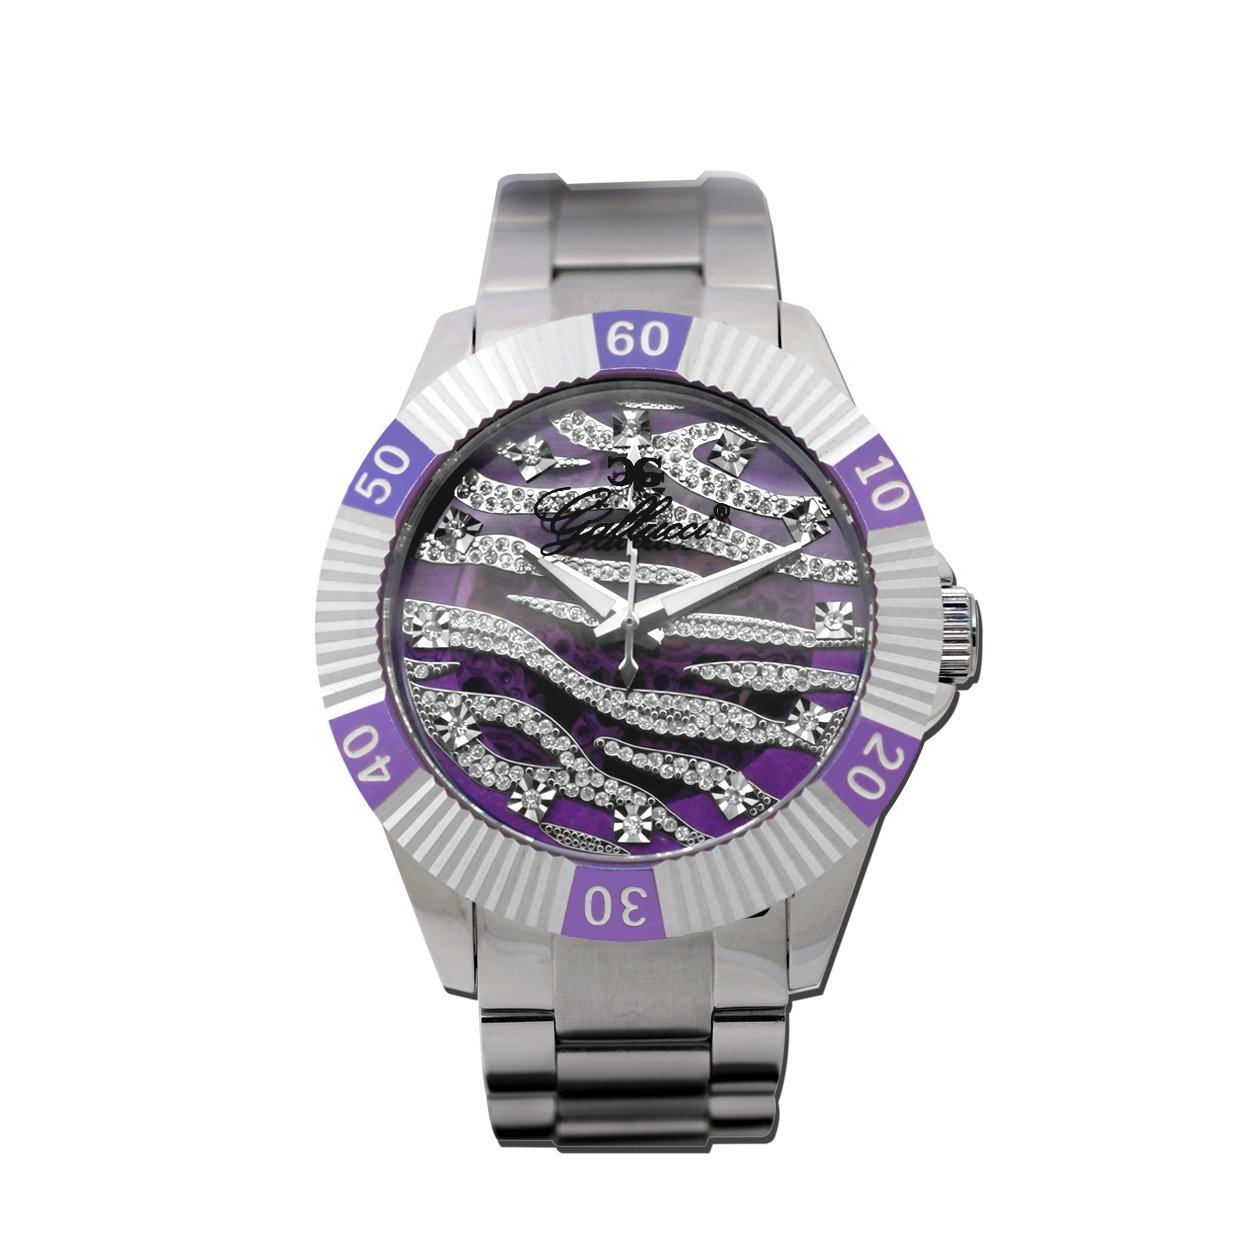 Gallucci Unisex Fashion Skeleton Automatic Wrist Watch, Color Dial with Stainless Steel Band